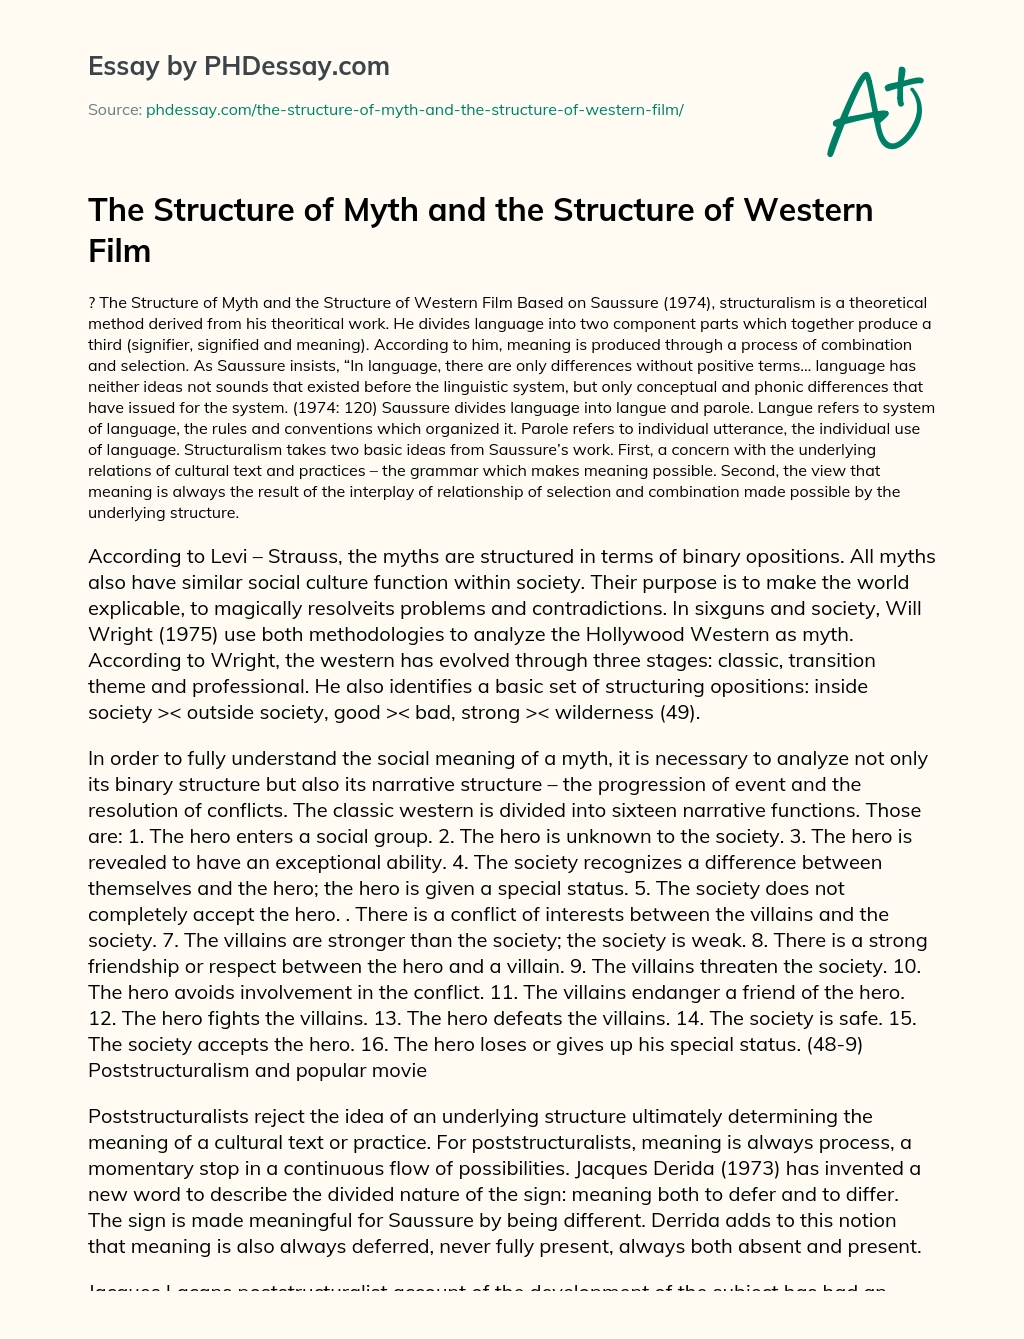 The Structure of Myth and the Structure of Western Film essay